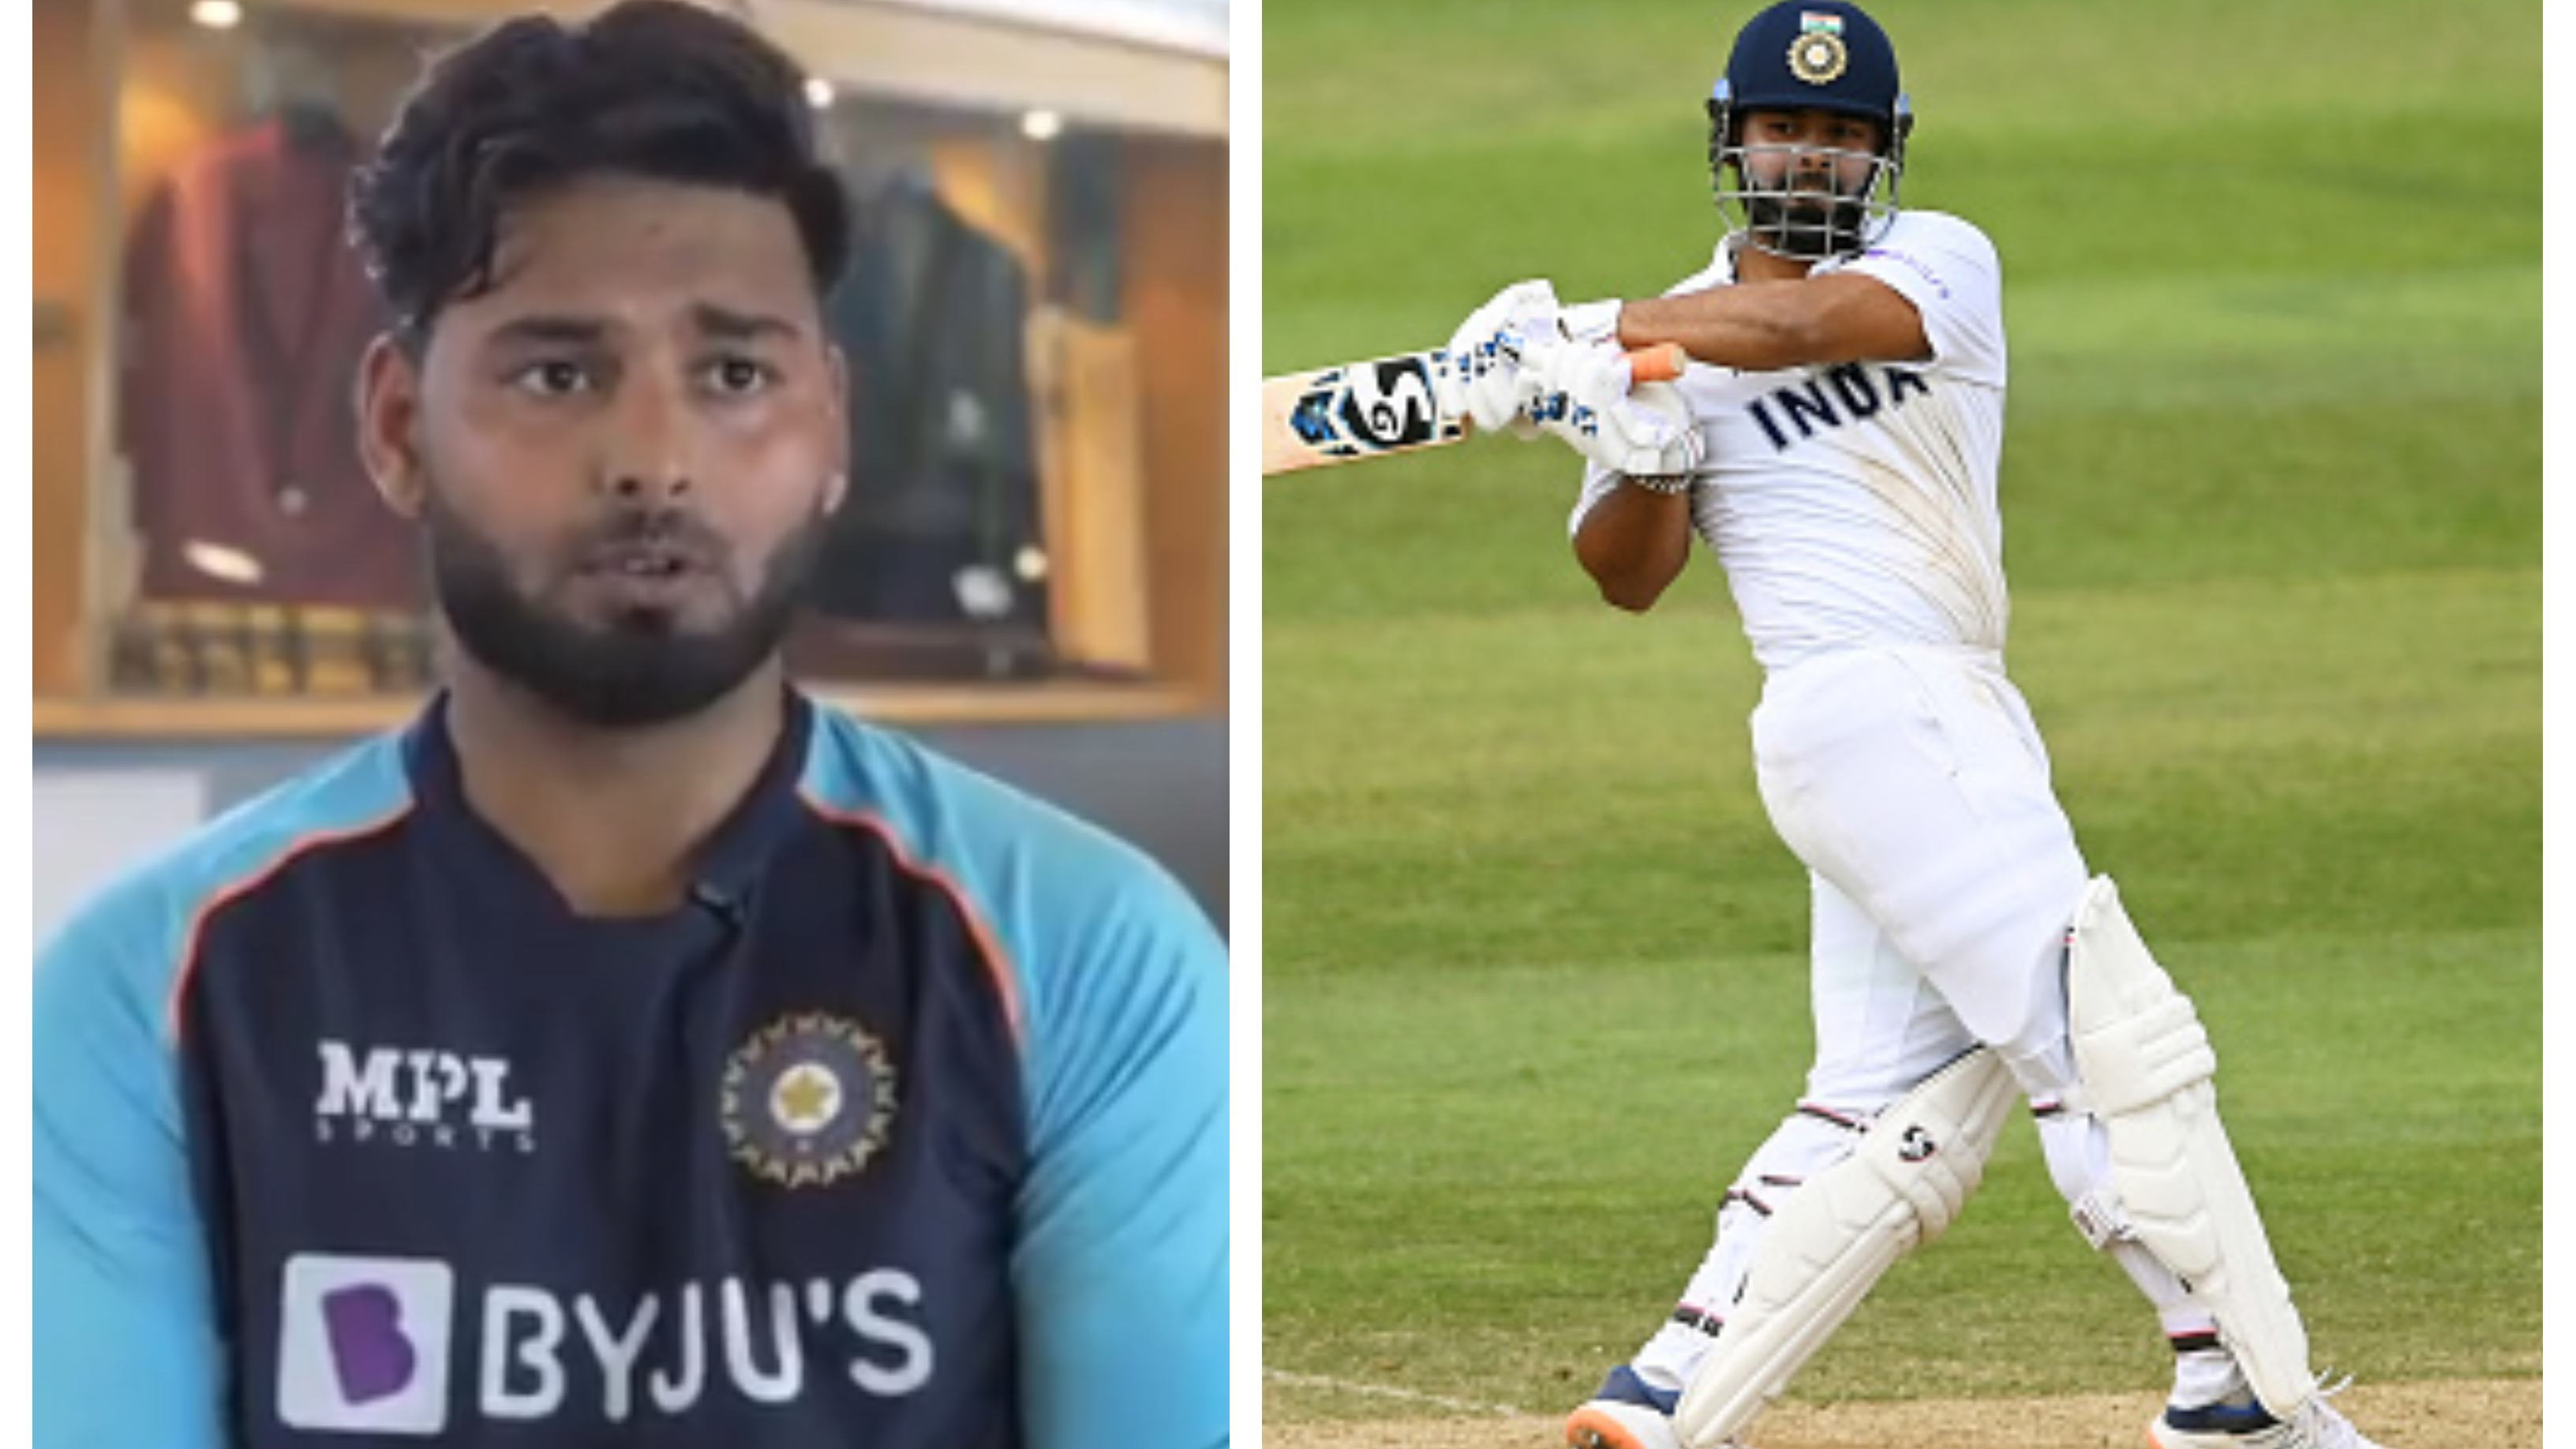 ENG v IND 2021: WATCH – Rishabh Pant glad to have learnt from his mistakes, wants to keep improving